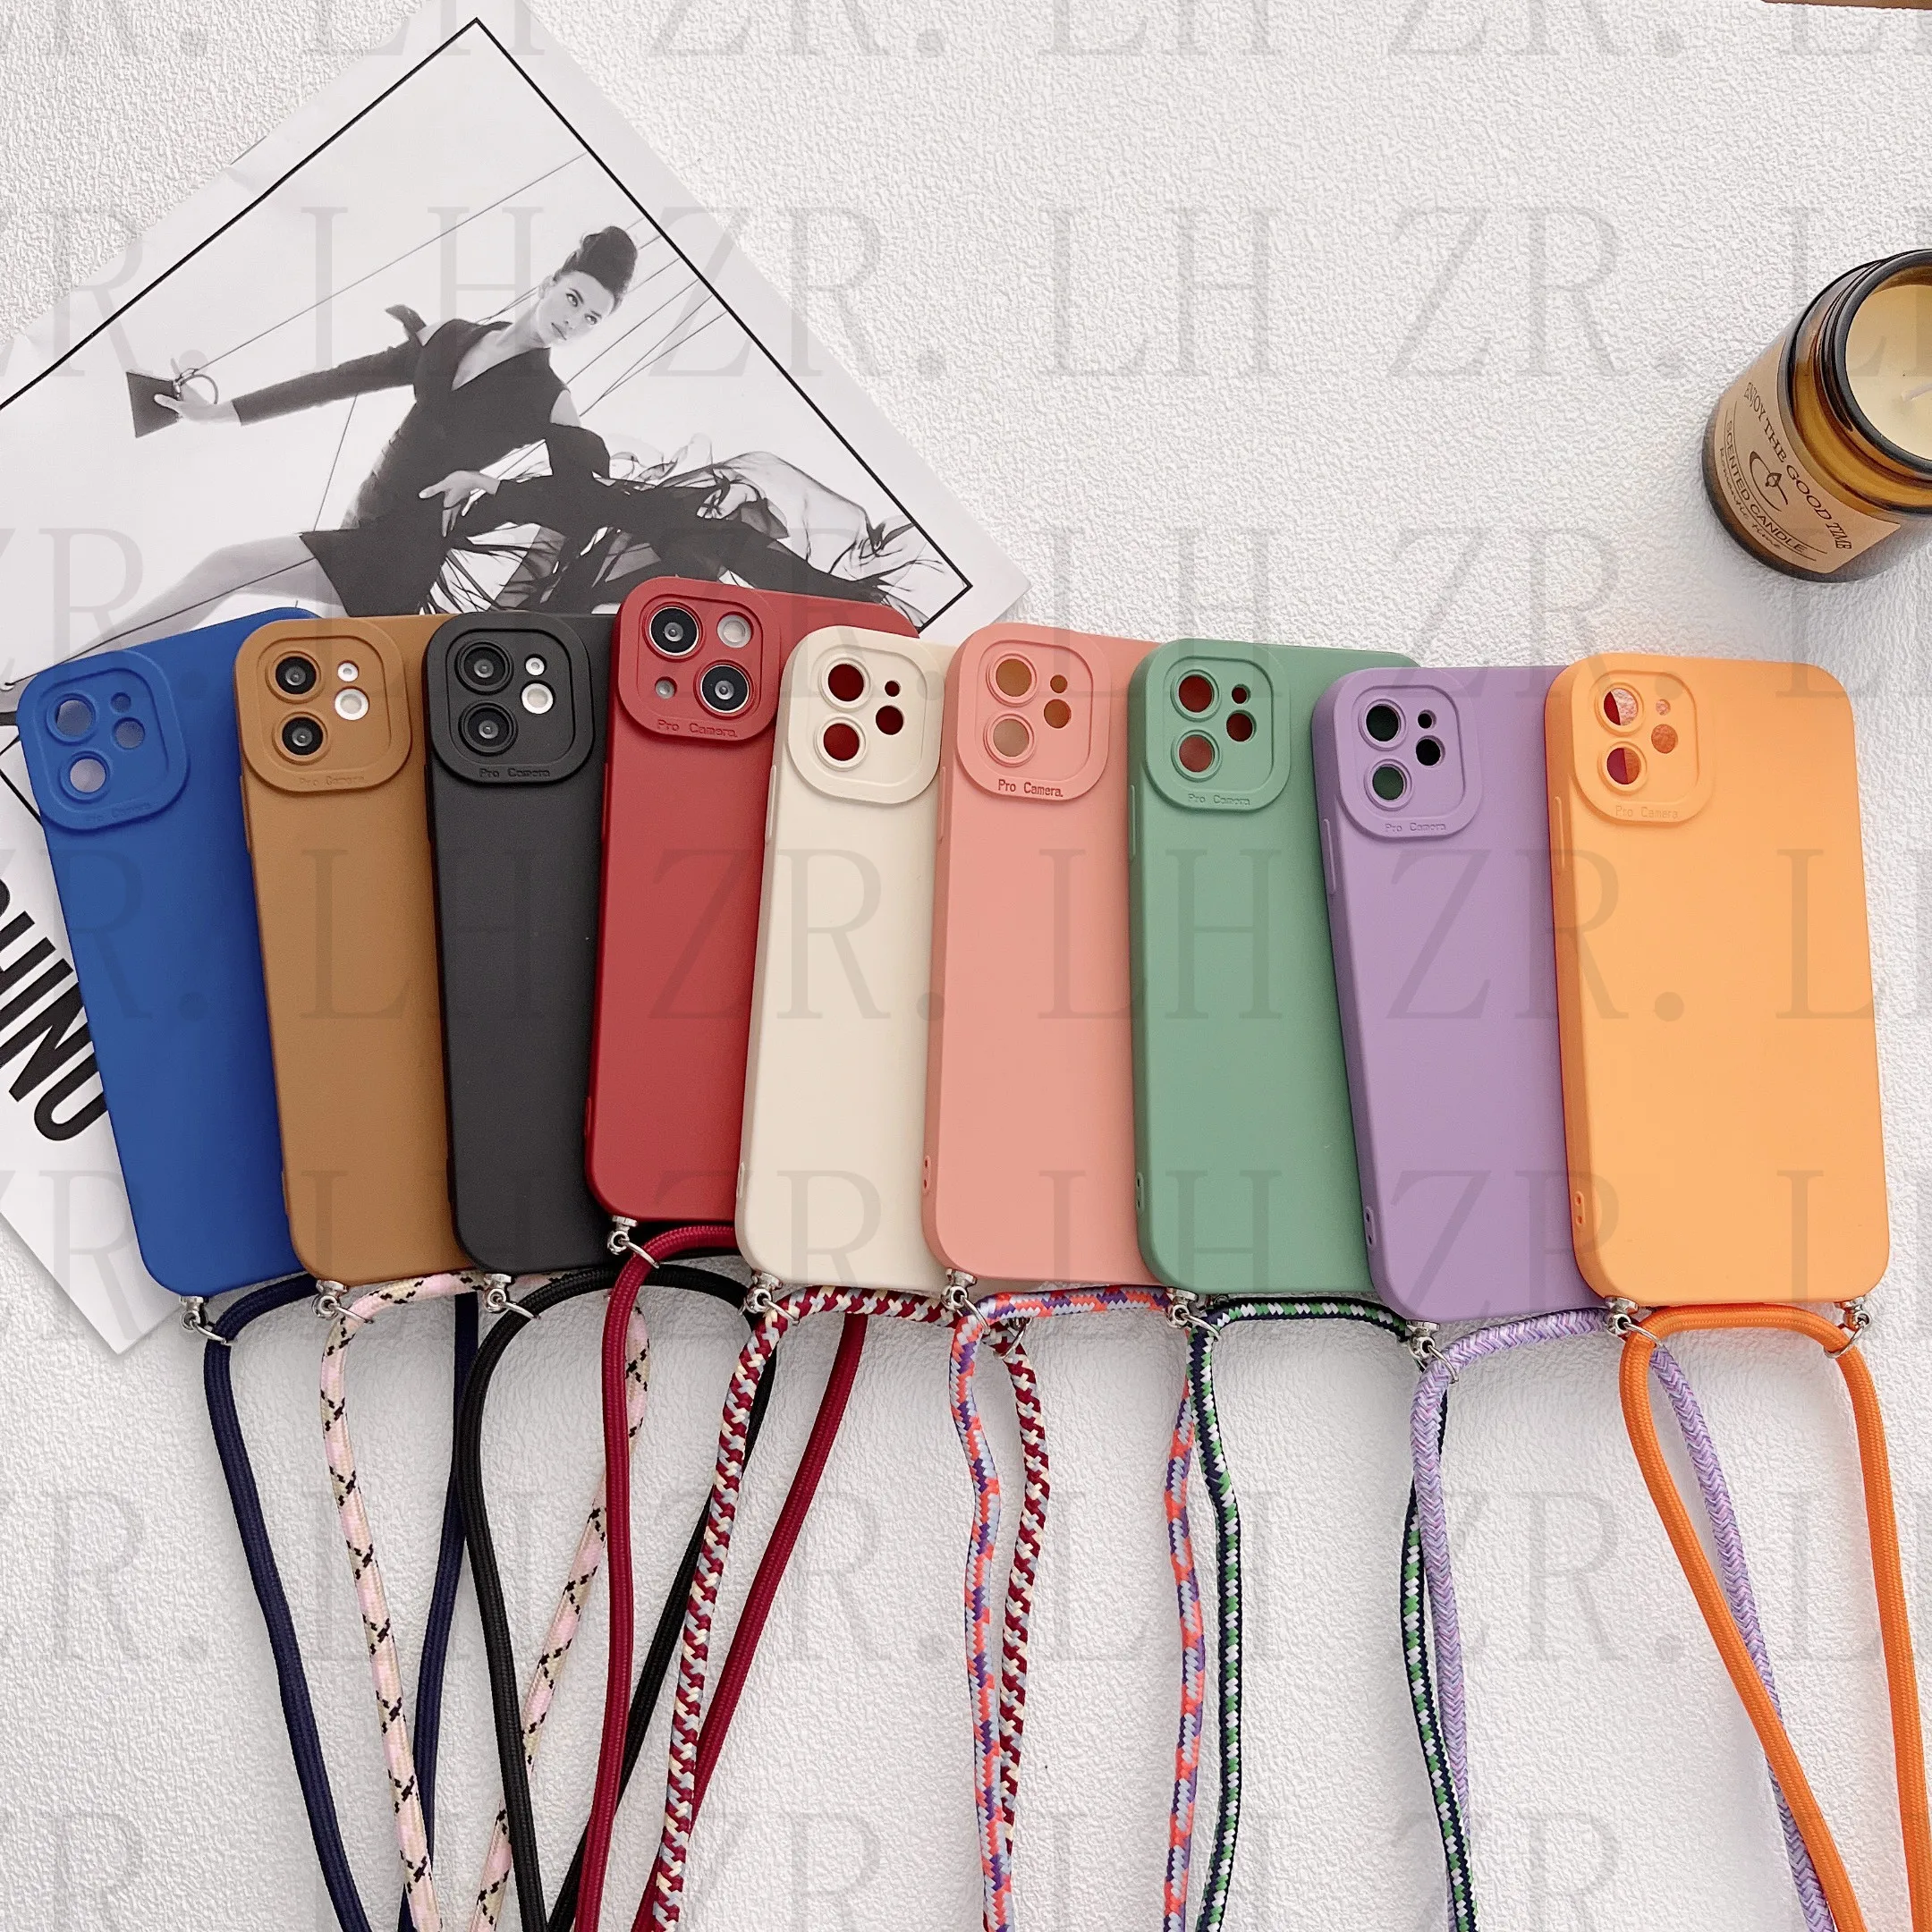 

Original Strap Cord Chain Phone Case For APPLE iPhone 14 13 12 11 Pro Max XS X XR X 7 8Plus SE 2020 Carry Necklace Lanyard Cover